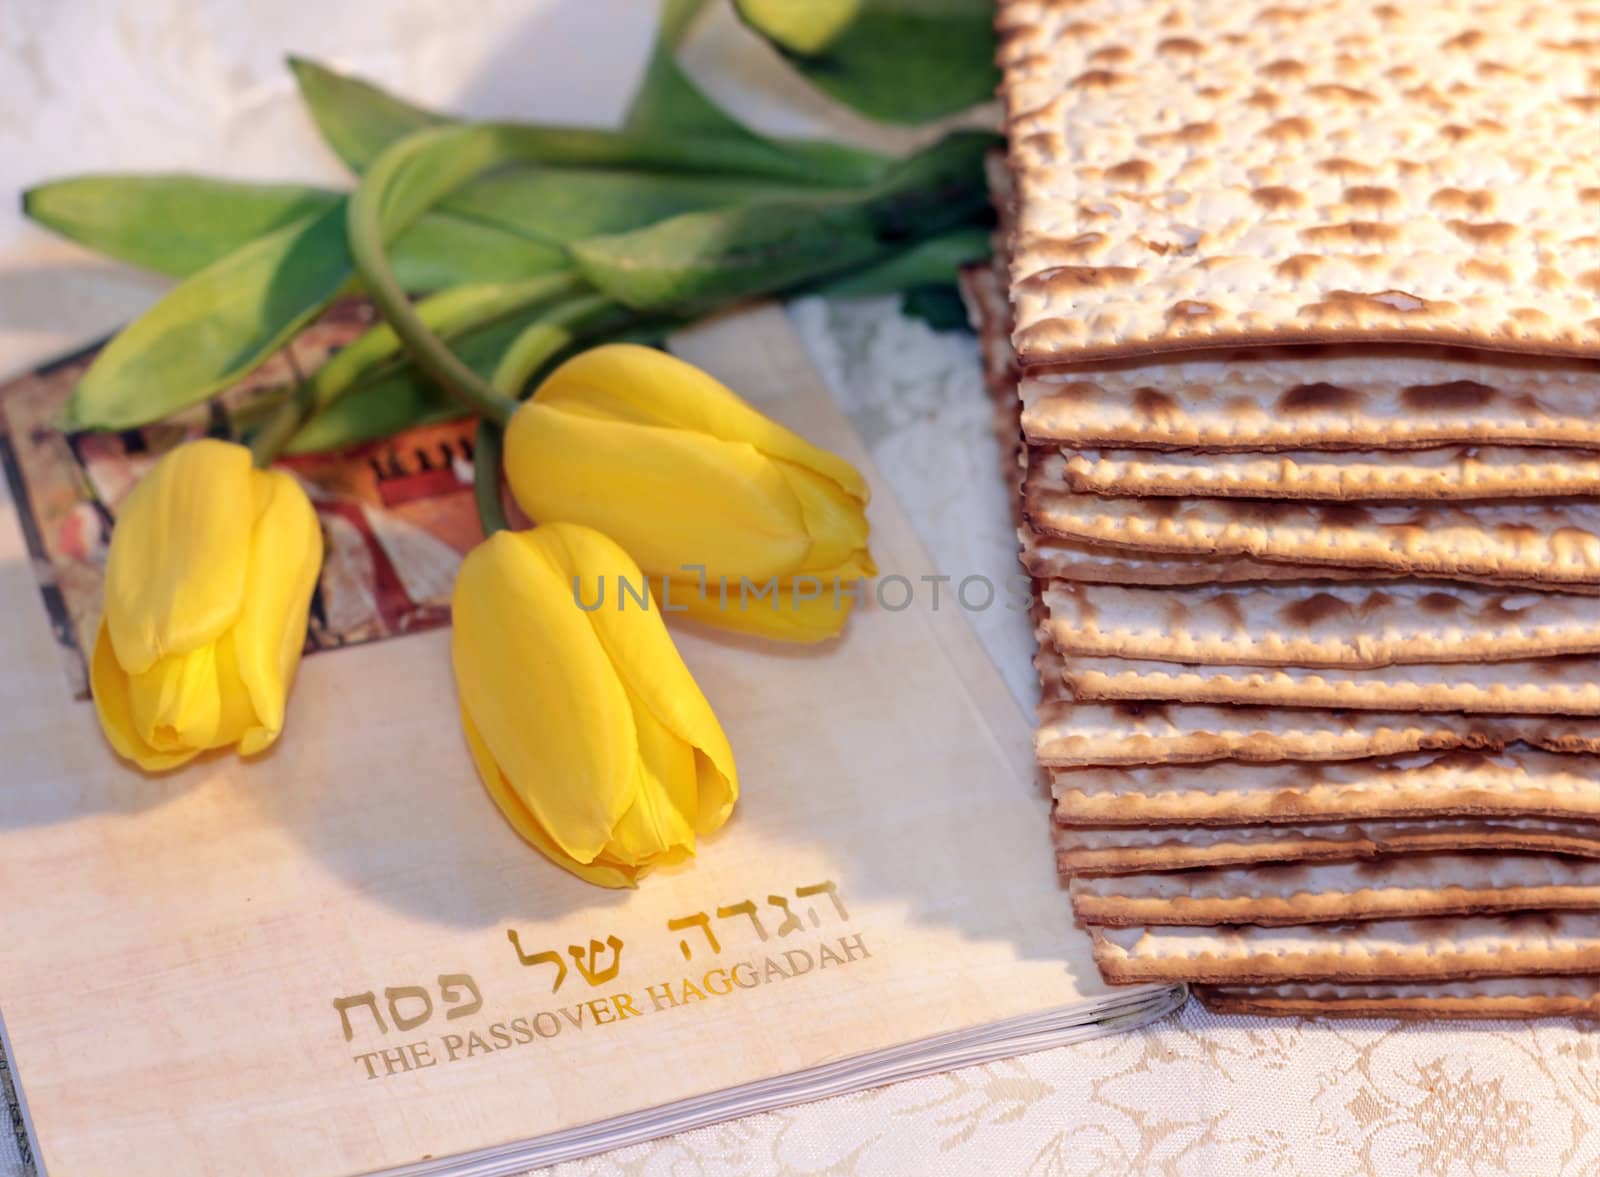 joyful spring festival - jewish holiday of Passover and its attributes